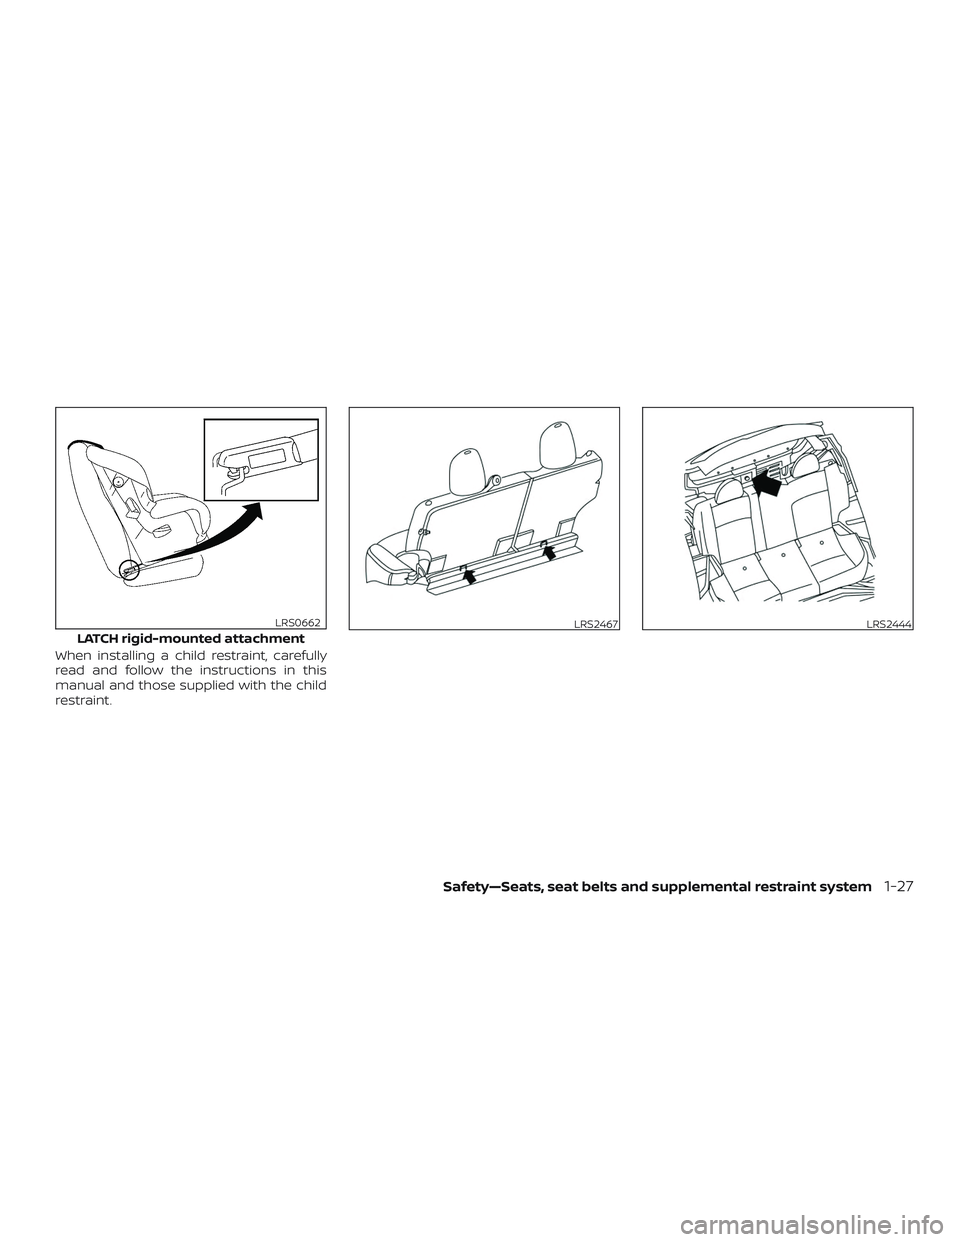 NISSAN MICRA 2018  Owner´s Manual When installing a child restraint, carefully
read and follow the instructions in this
manual and those supplied with the child
restraint.
LATCH rigid-mounted attachment
LRS0662LRS2467LRS2444
Safety—